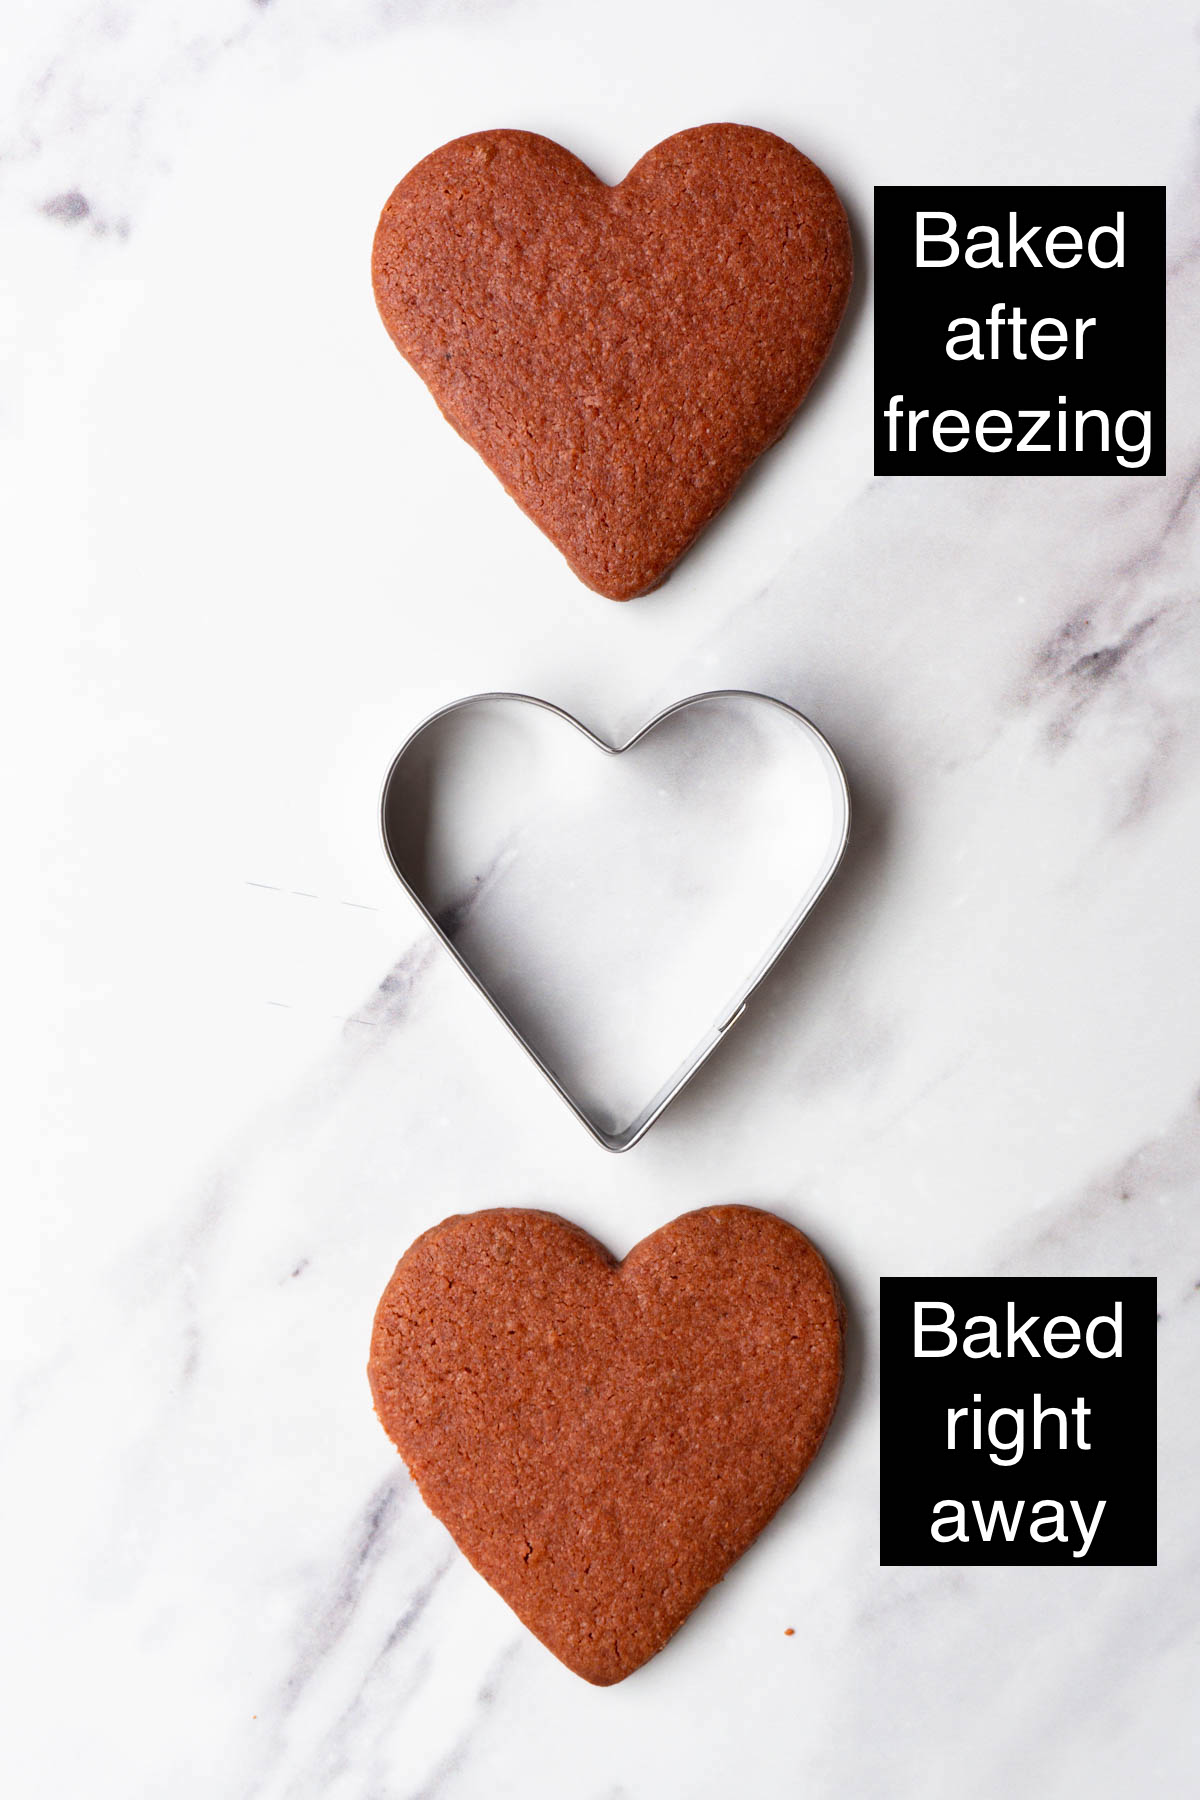 Image showing two heart shaped cookies, one was baked right away and one was baked after freezing the dough.